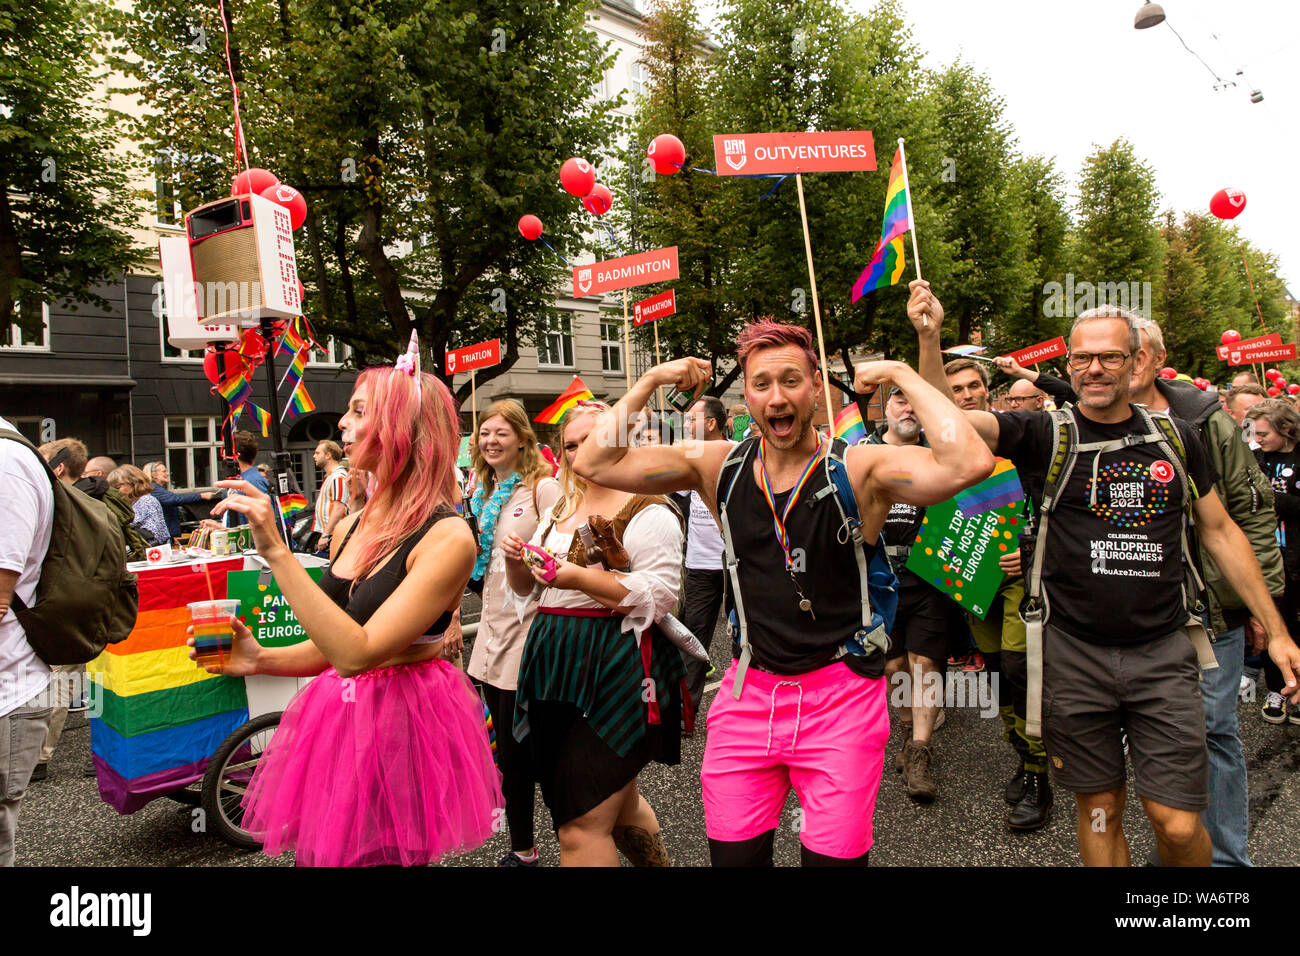 Participants from LGBT sporting clubs seen at the Copenhagen Pride Parade 2019 on August 17, 2019 in Copenhagen, Denmark. The Danish Parade keep on growing: This year the Parade consisted of some 160 groups, counting 35 - 40.000 participants and along the 3.3 Km long route from the Frederiksberg City Hall to Copenhagen City Hall  some 250.000 – 300.000 spectators were lined up. The Parade together with the Pride Week has taken place since 1996. Coca Cola is the main Sponsor of this year Pride Week, which the organizer name “A Festival for Diversity”. (Byline: Photo by OJPHOTOS/Alamy) Stock Photo